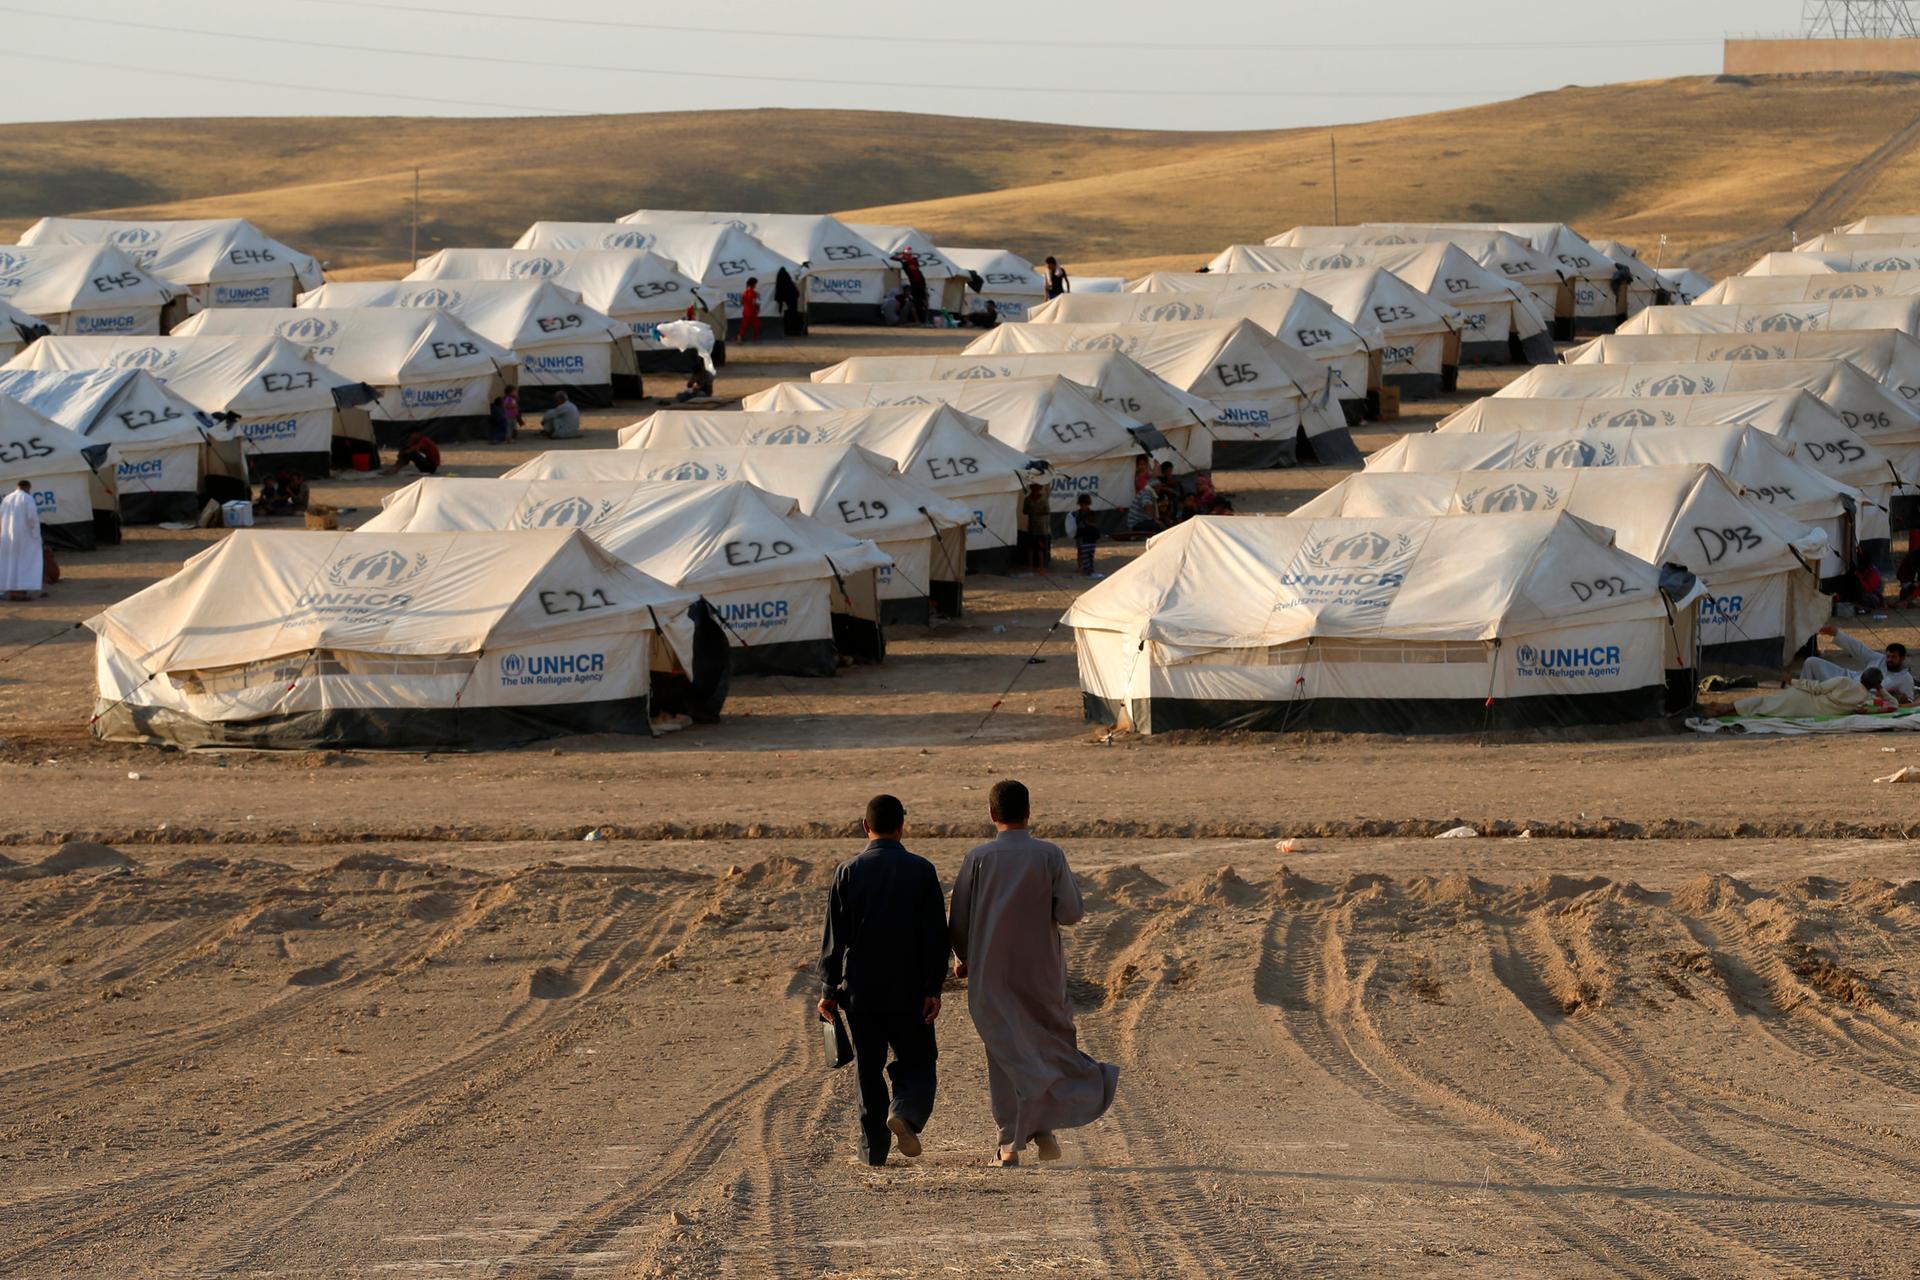 Iraqi refugees, who fled from the violence in Mosul, walk inside the Khazer refugee camp on the outskirts of Arbil, in Iraq's Kurdistan region, June 27, 2014.